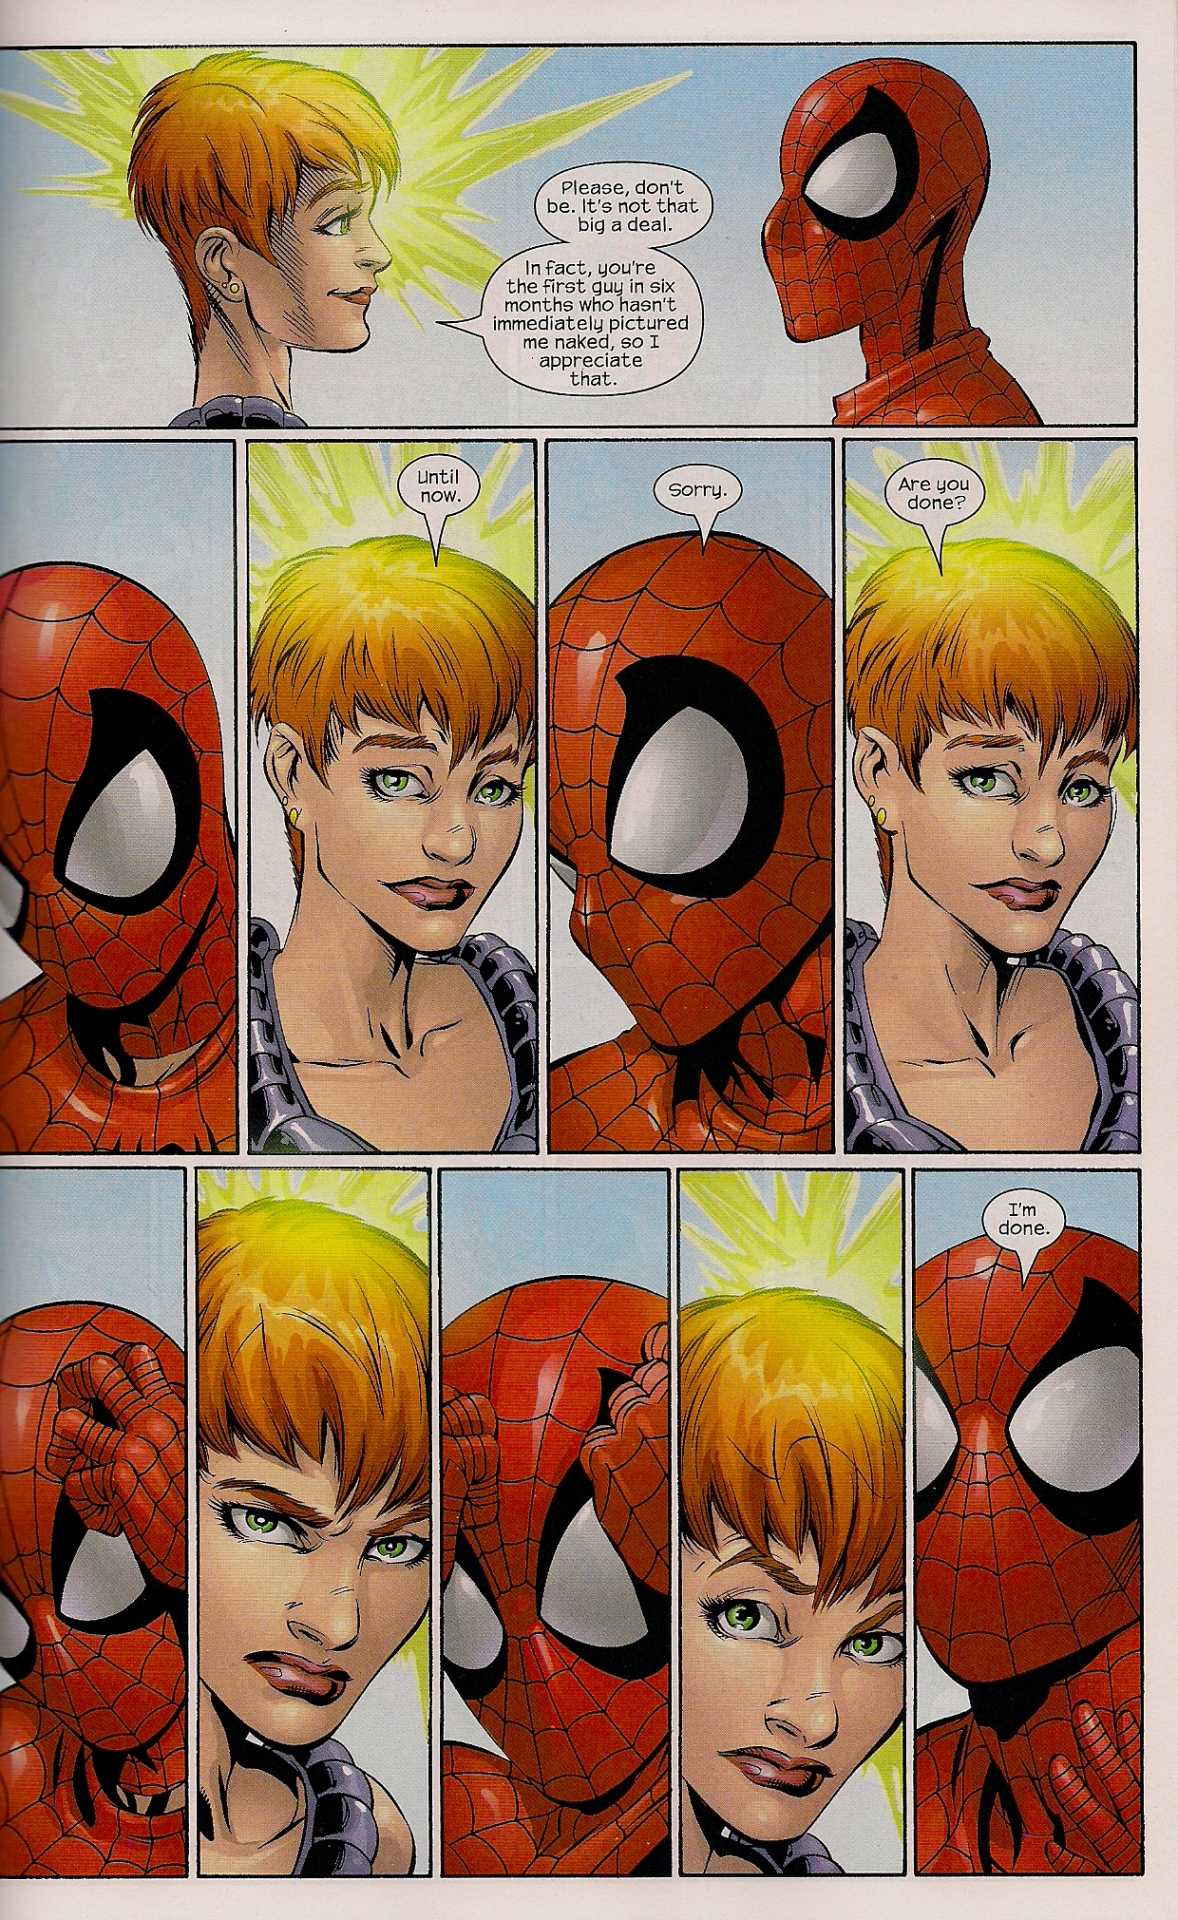 ultimate spider man jean grey - Please, don't be. It's not that big a deal. In fact, you're the first guy in six months who hasn't immediately pictured me naked, so I appreciate that. Until now. Sorry. Are you done? I'm done.